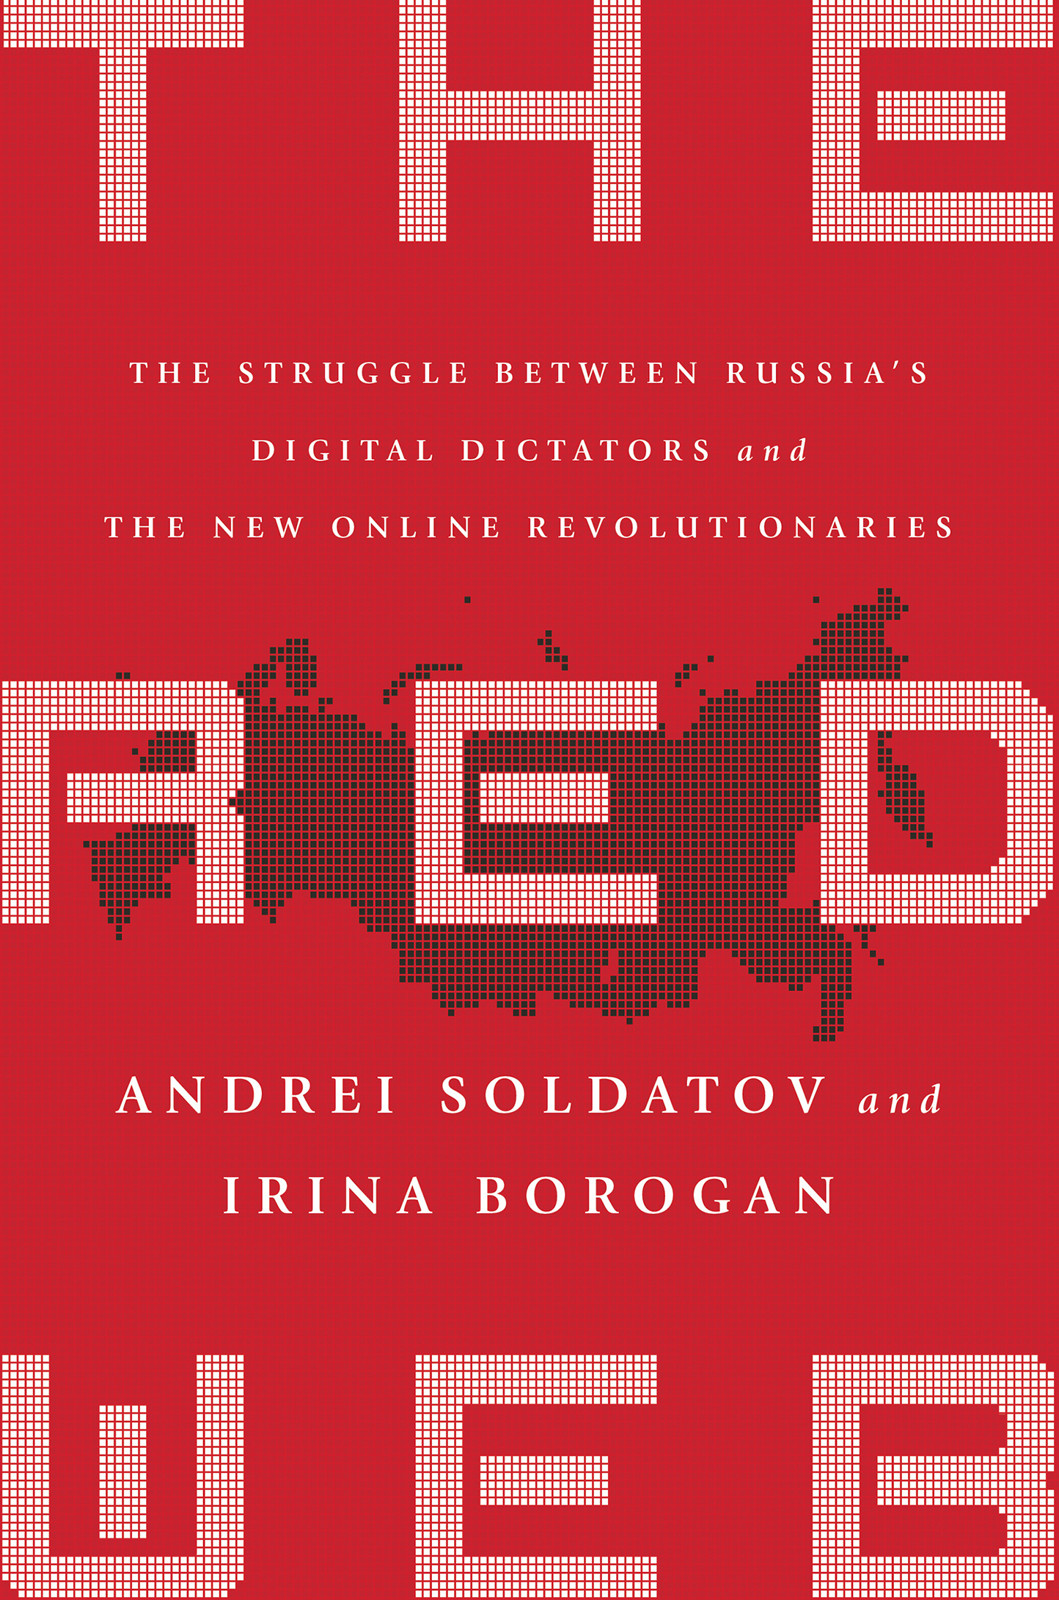 The Red Web The Struggle Between Russia's Digital Dictators and the New Online Revolutionaries by Andrei Soldatov, Irina Borogan